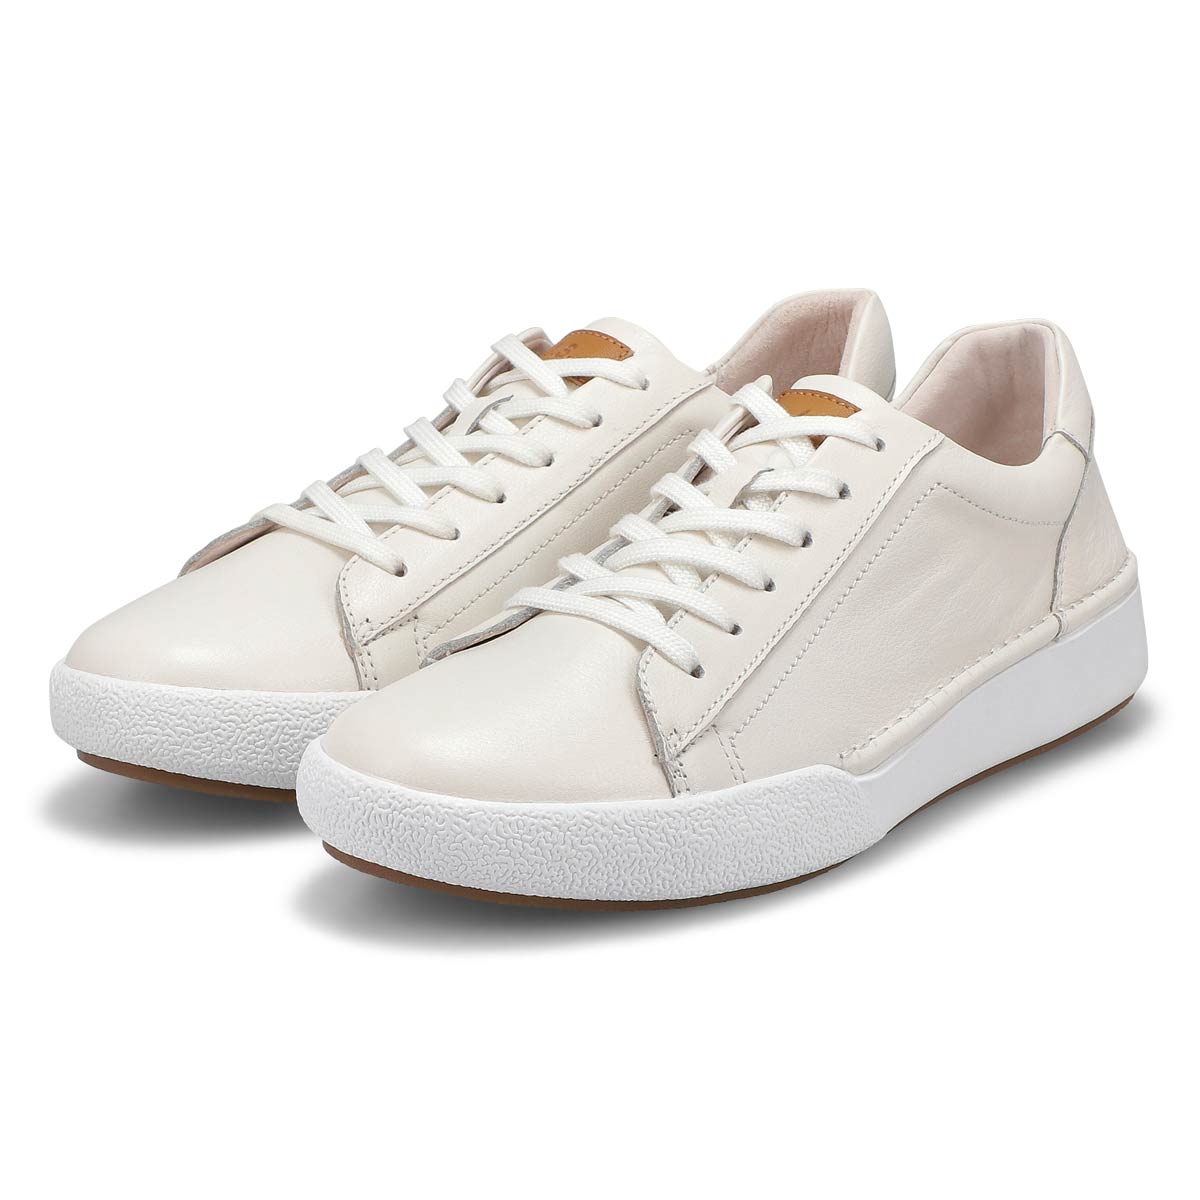 Women's Claire Lace Up Leather Sneaker - White